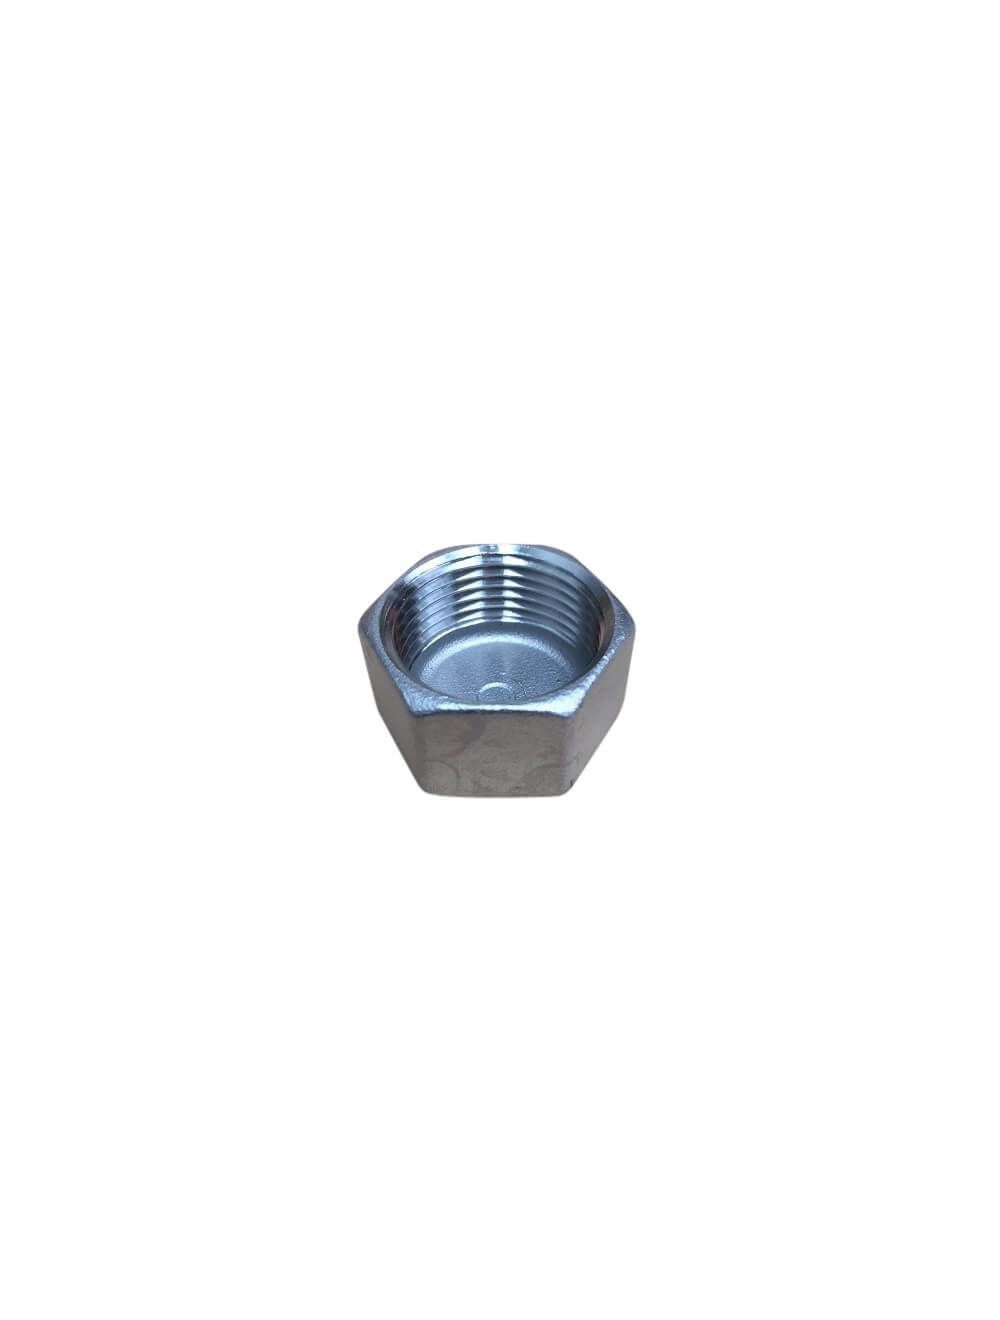 6mm Stainless Steel Hex Nut